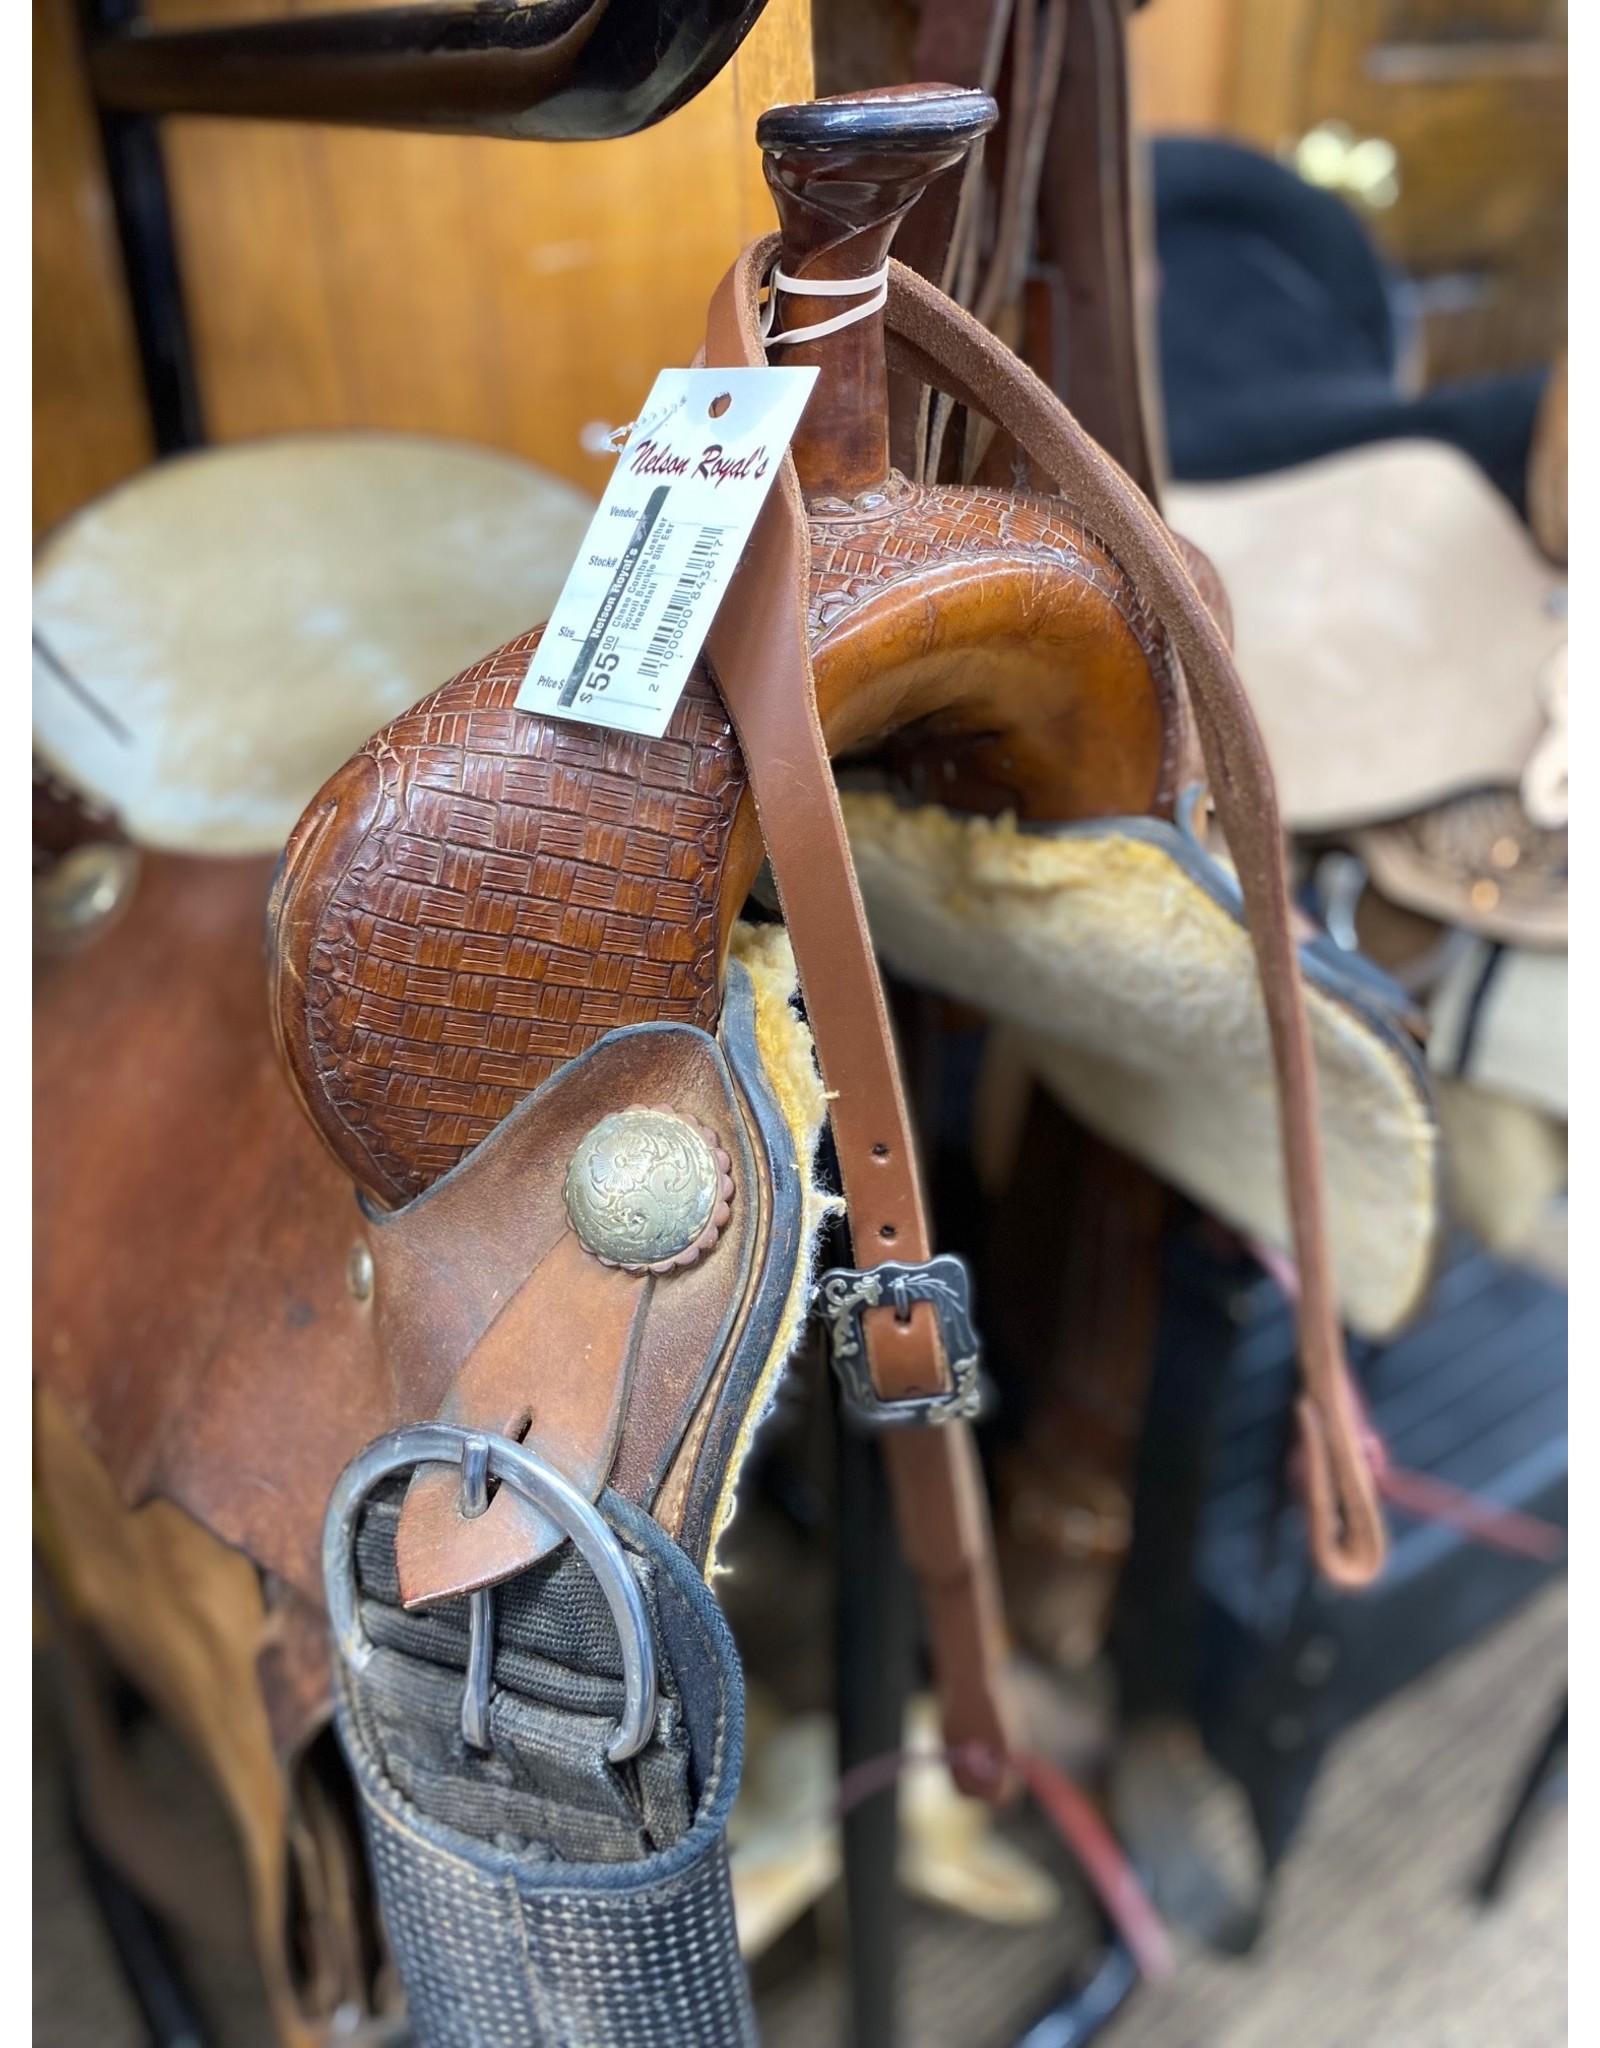 Chase Combs Leather Scroll Buckle Slit Ear Headstall